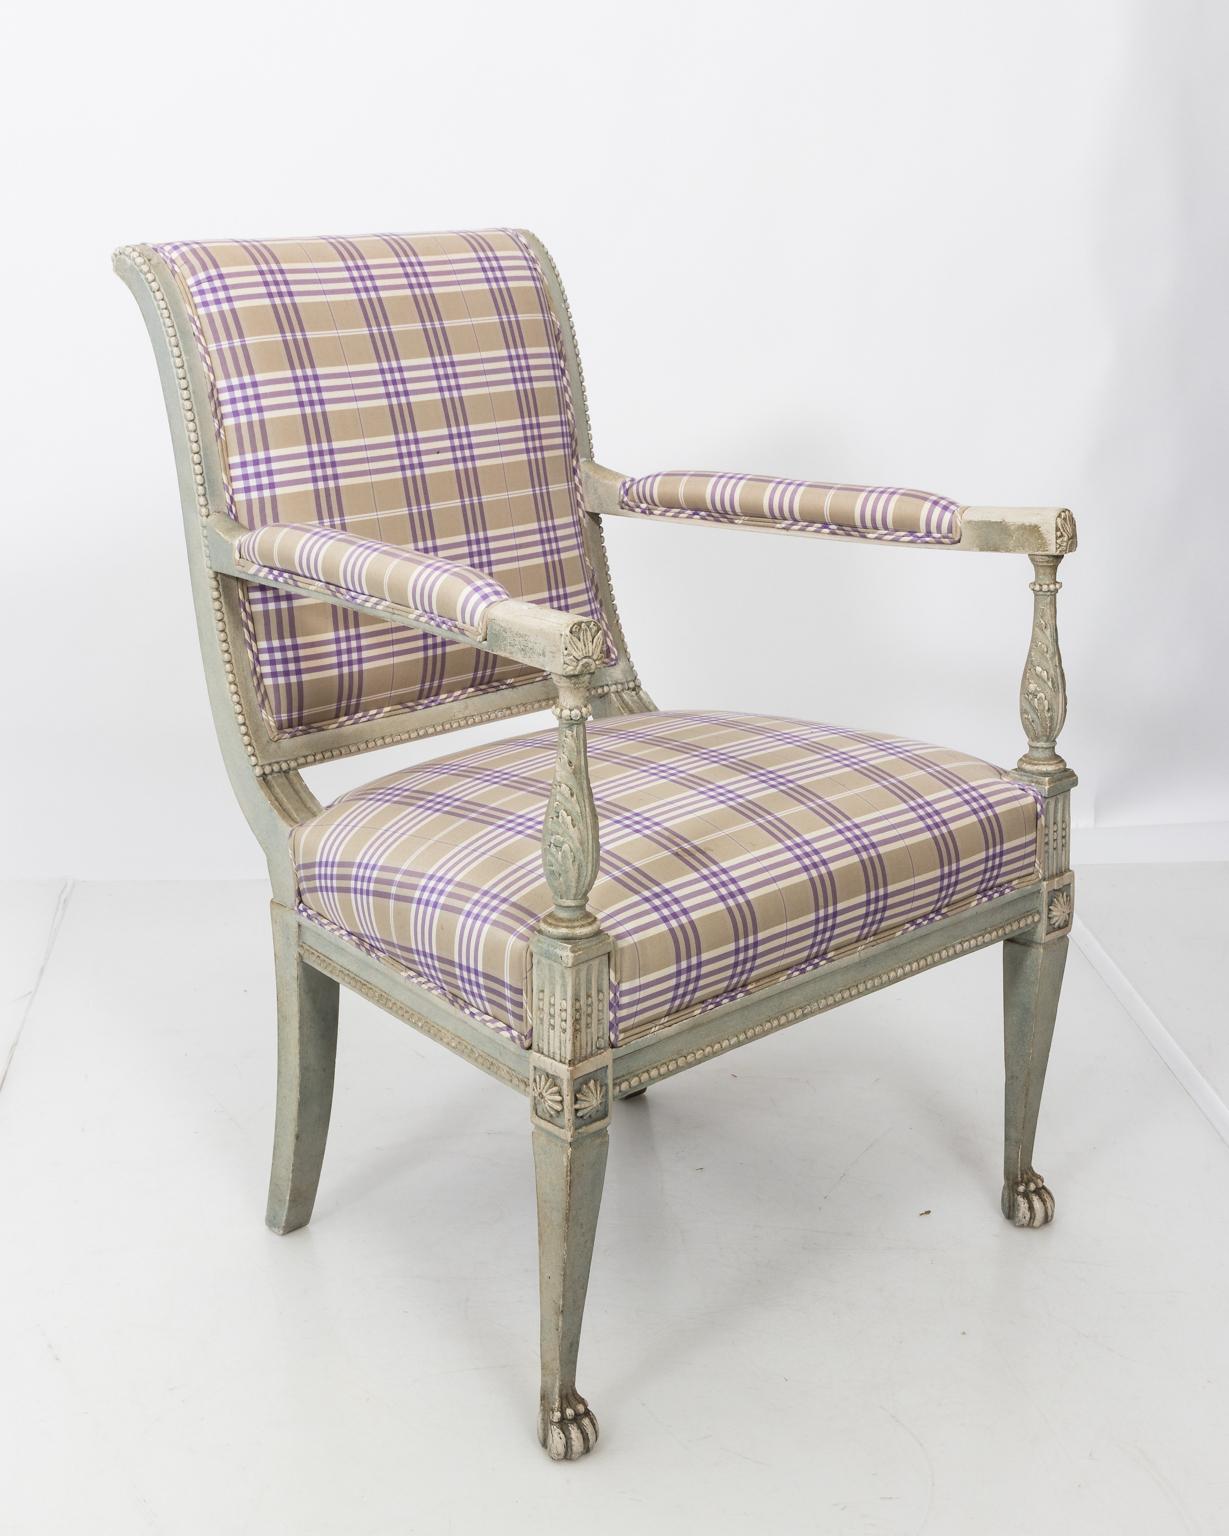 Pair of French Louis XVI Directoire style armchairs, painted grey and upholstered in Pierre Frey fabric, circa 19th century pair of French Louis XVI Directoire style armchairs, painted grey and upholstered in Pierre Frey fabric. The chairs also